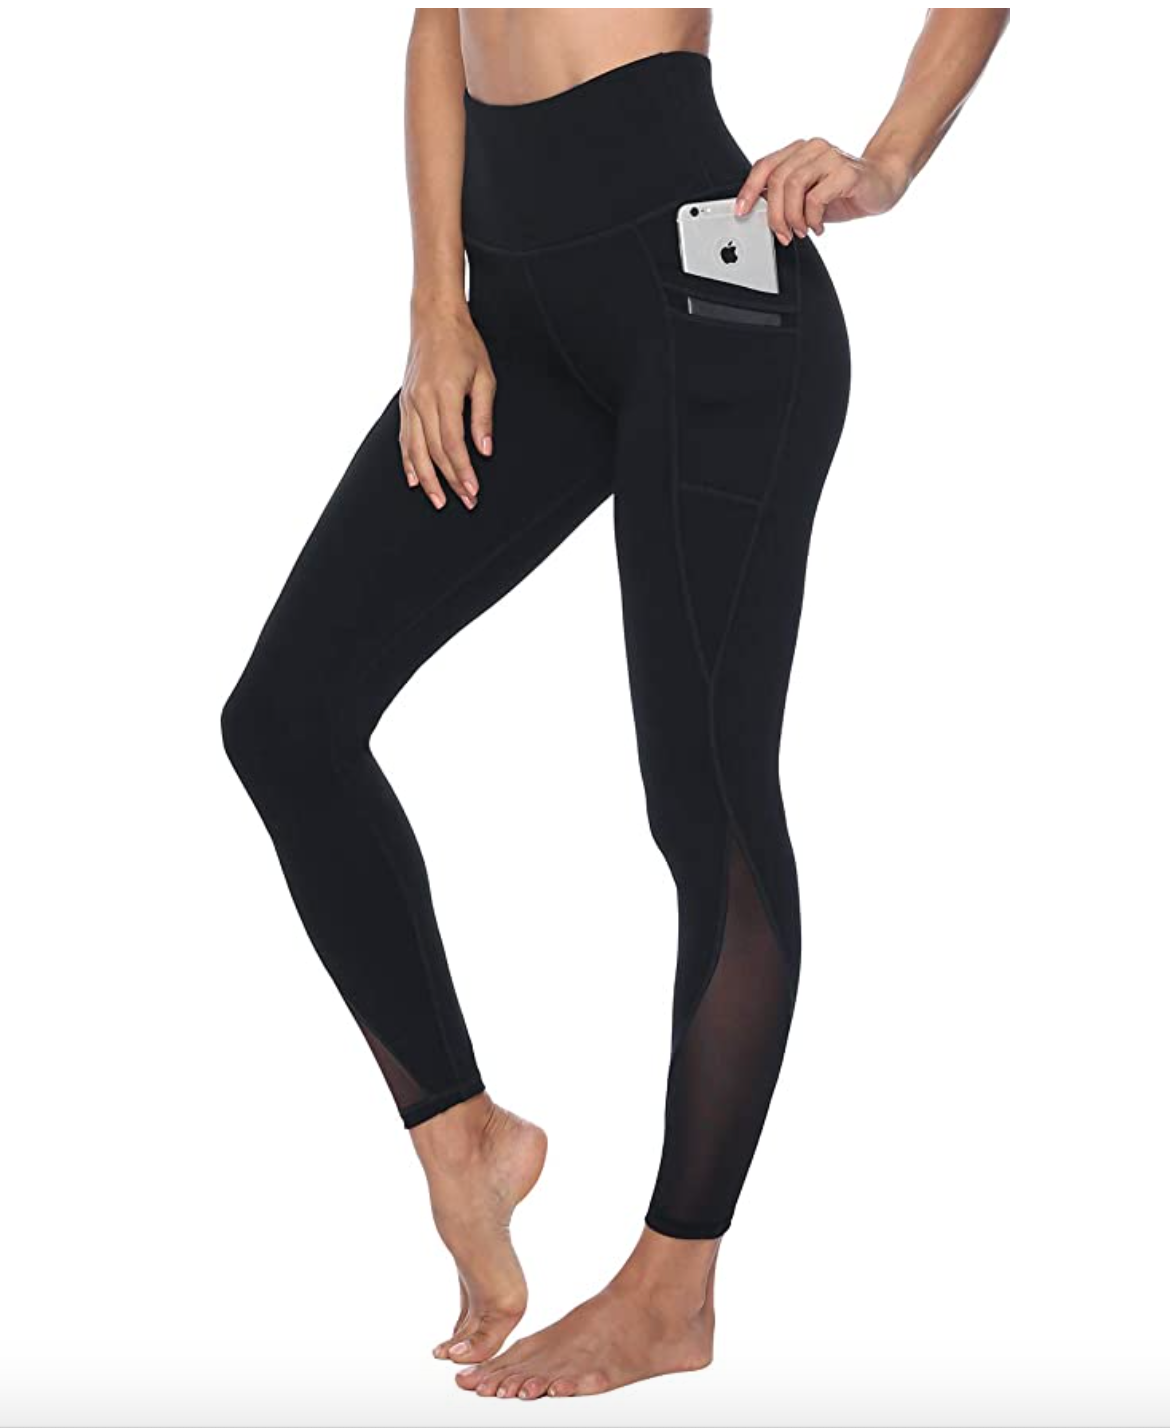 Women High Waist Leggings with Pockets Yoga Extra Soft Leggings Hidden Pockets Non See-Through Stretchy Workout Pants